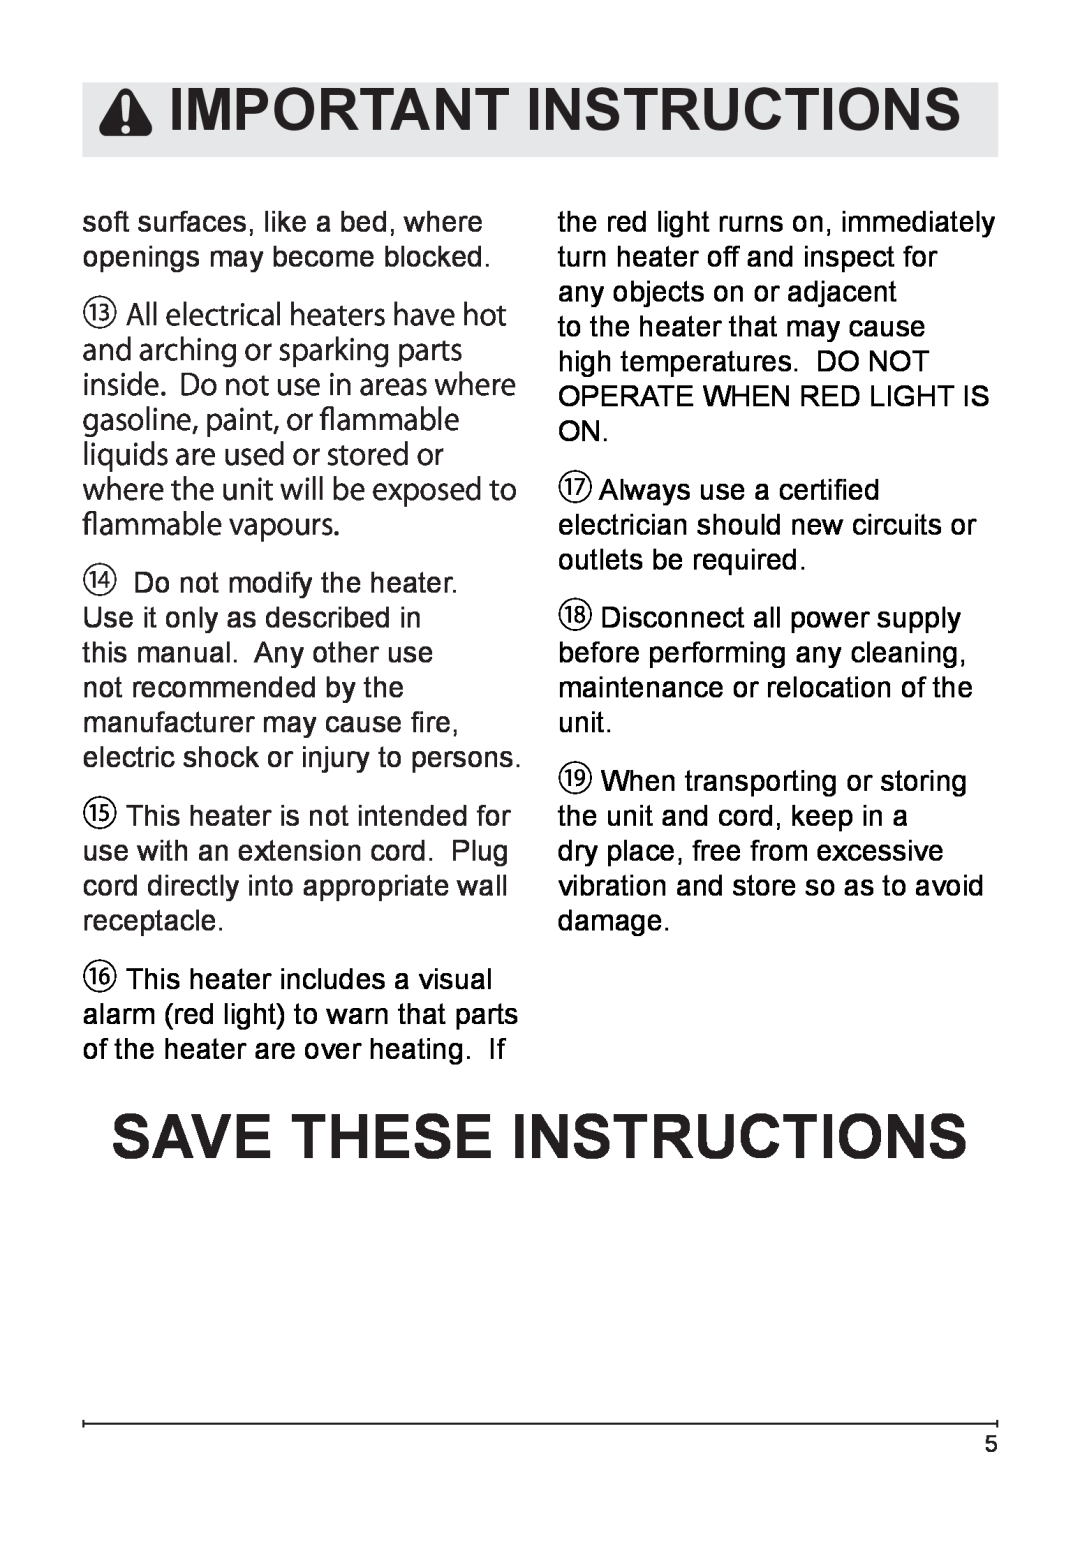 NewAir G70 owner manual SAVE THESE Instructions, Important Instructions 